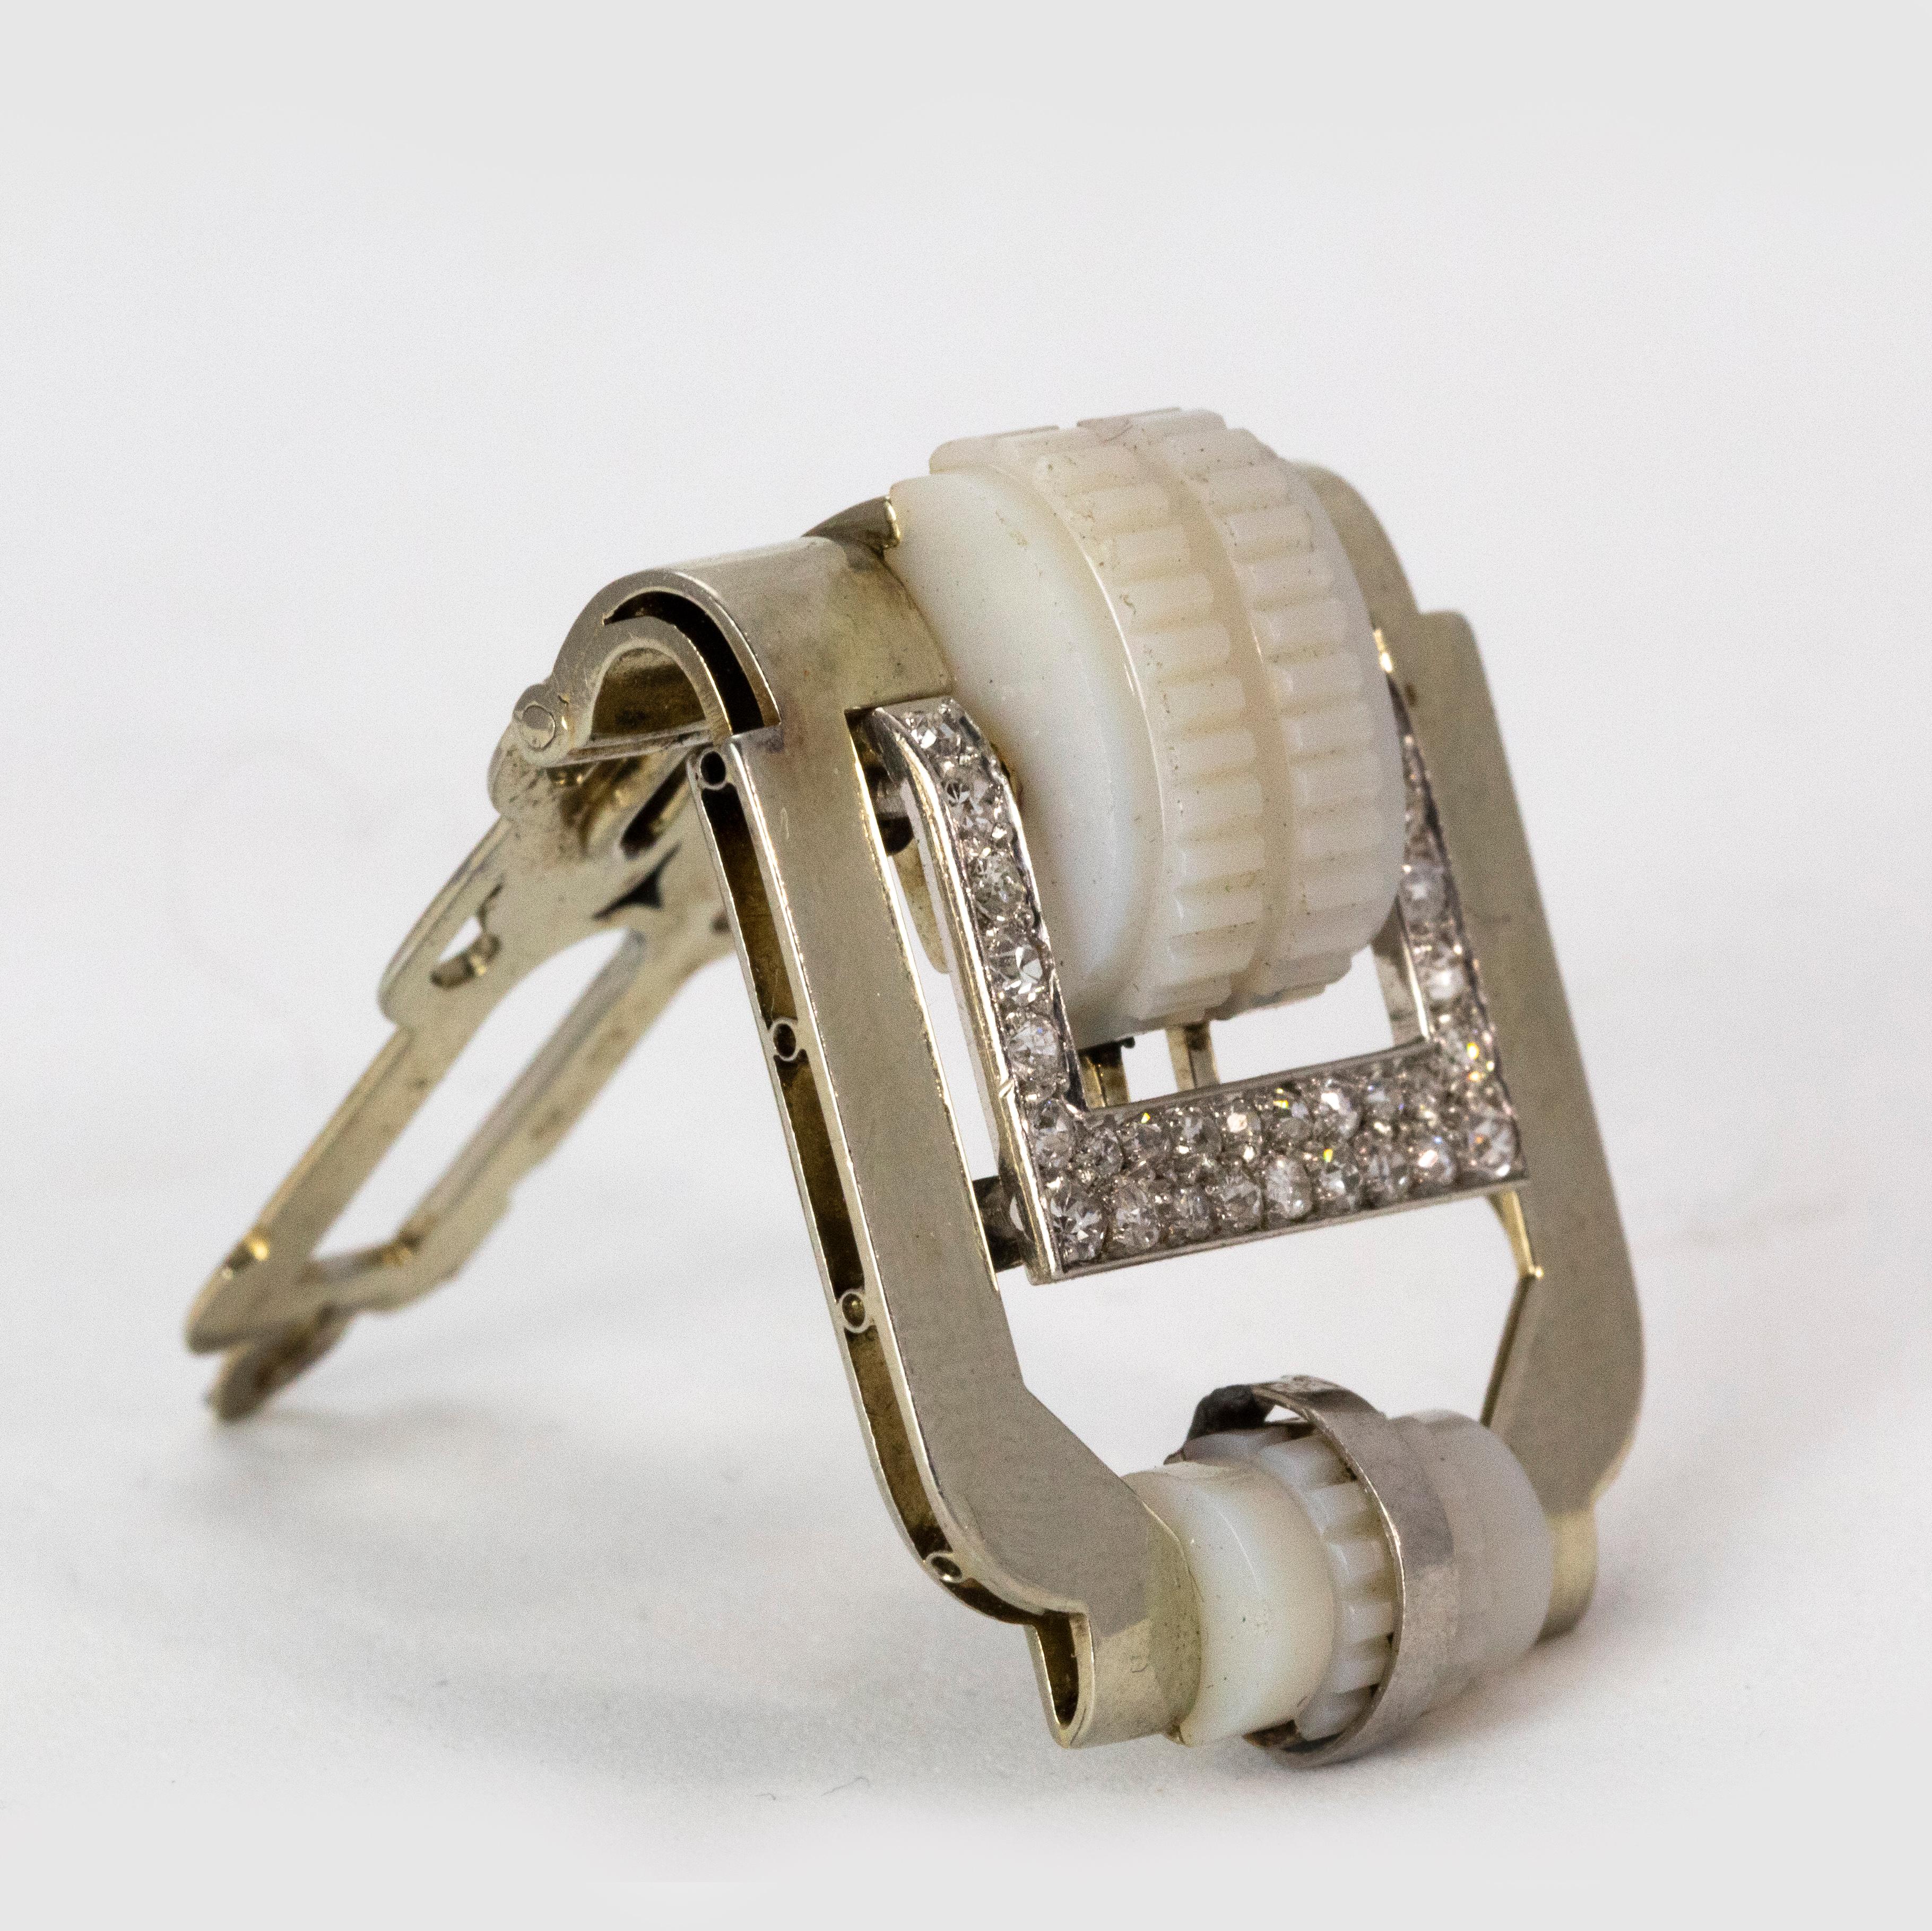 An exquisite diamond encrusted dress clip, modelled in platinum and chalcedony. This beautiful clip was masterfully crafted in France during the Art Deco era circa 1920.